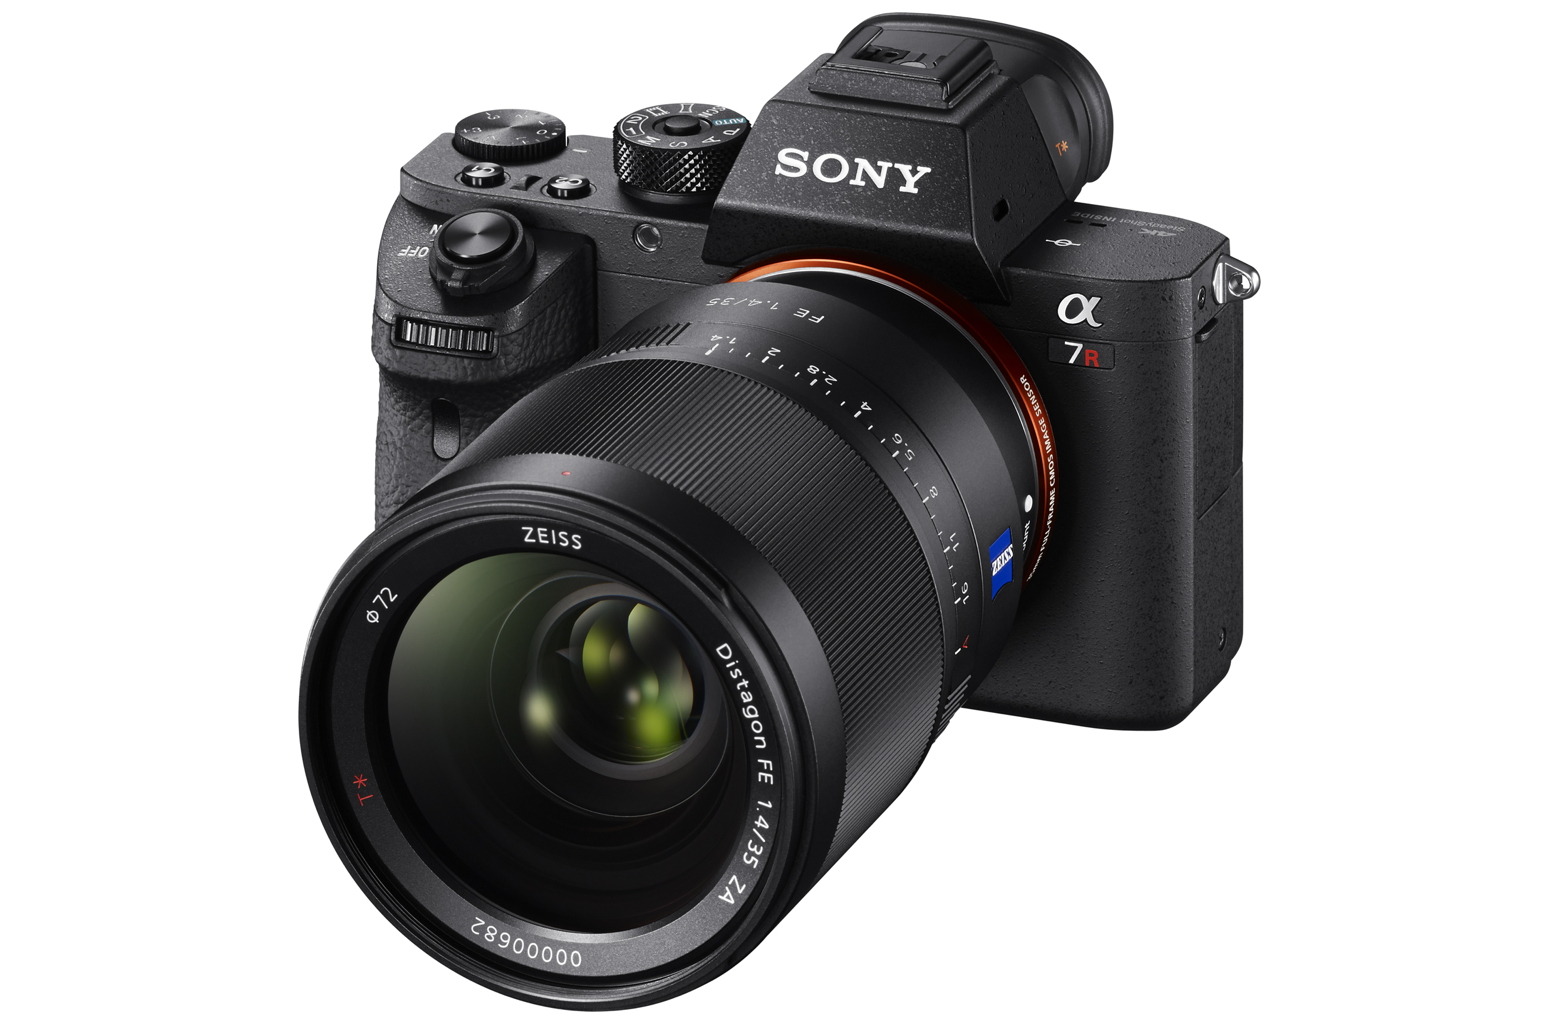 My thoughts about the Sony Alpha 7r - phillipreeve.net